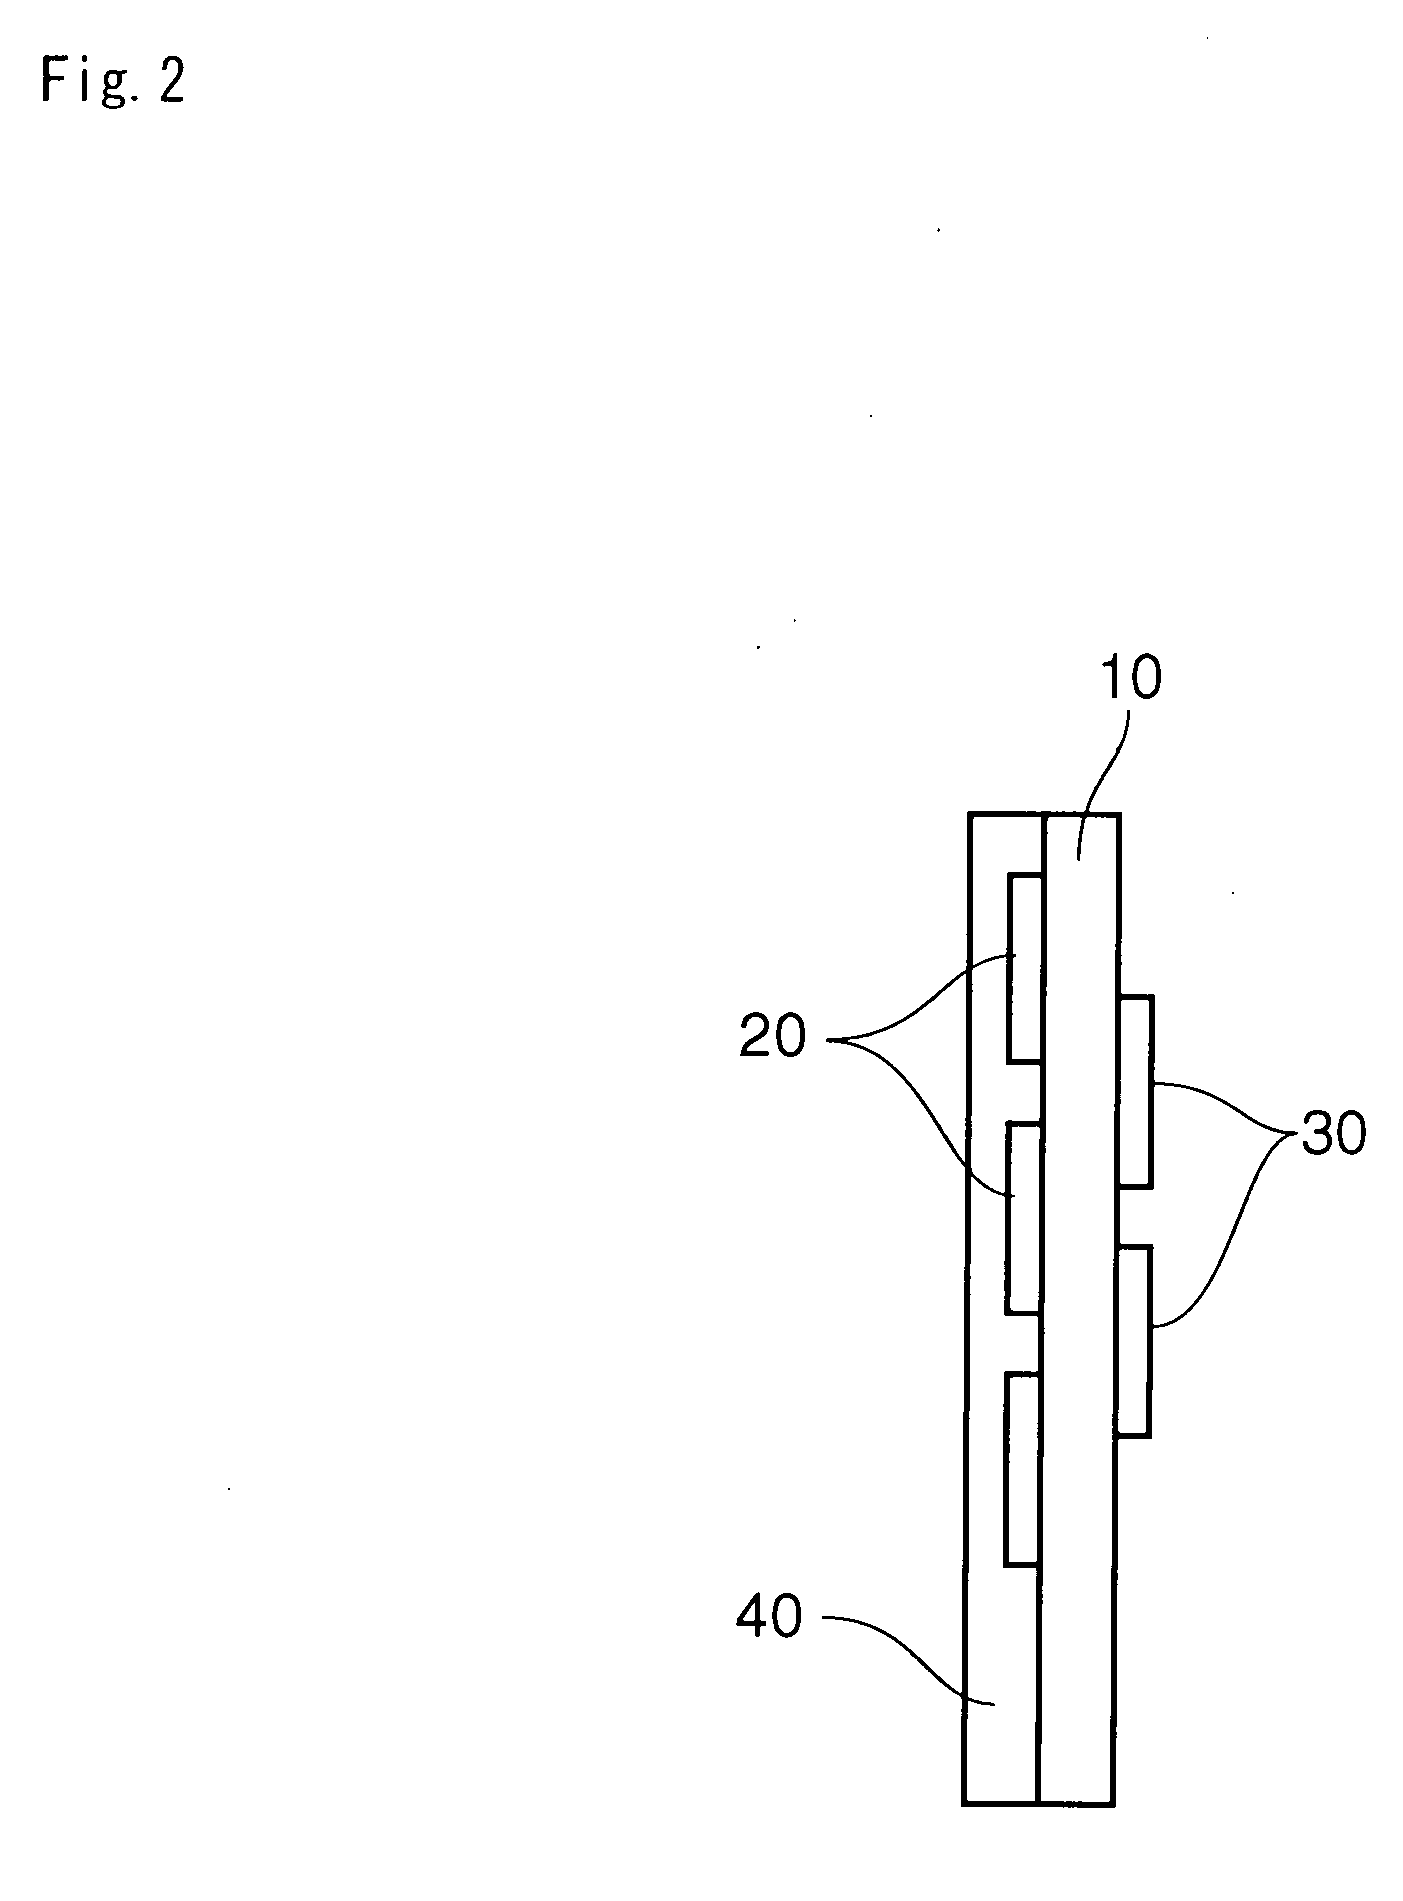 Touch panel input device